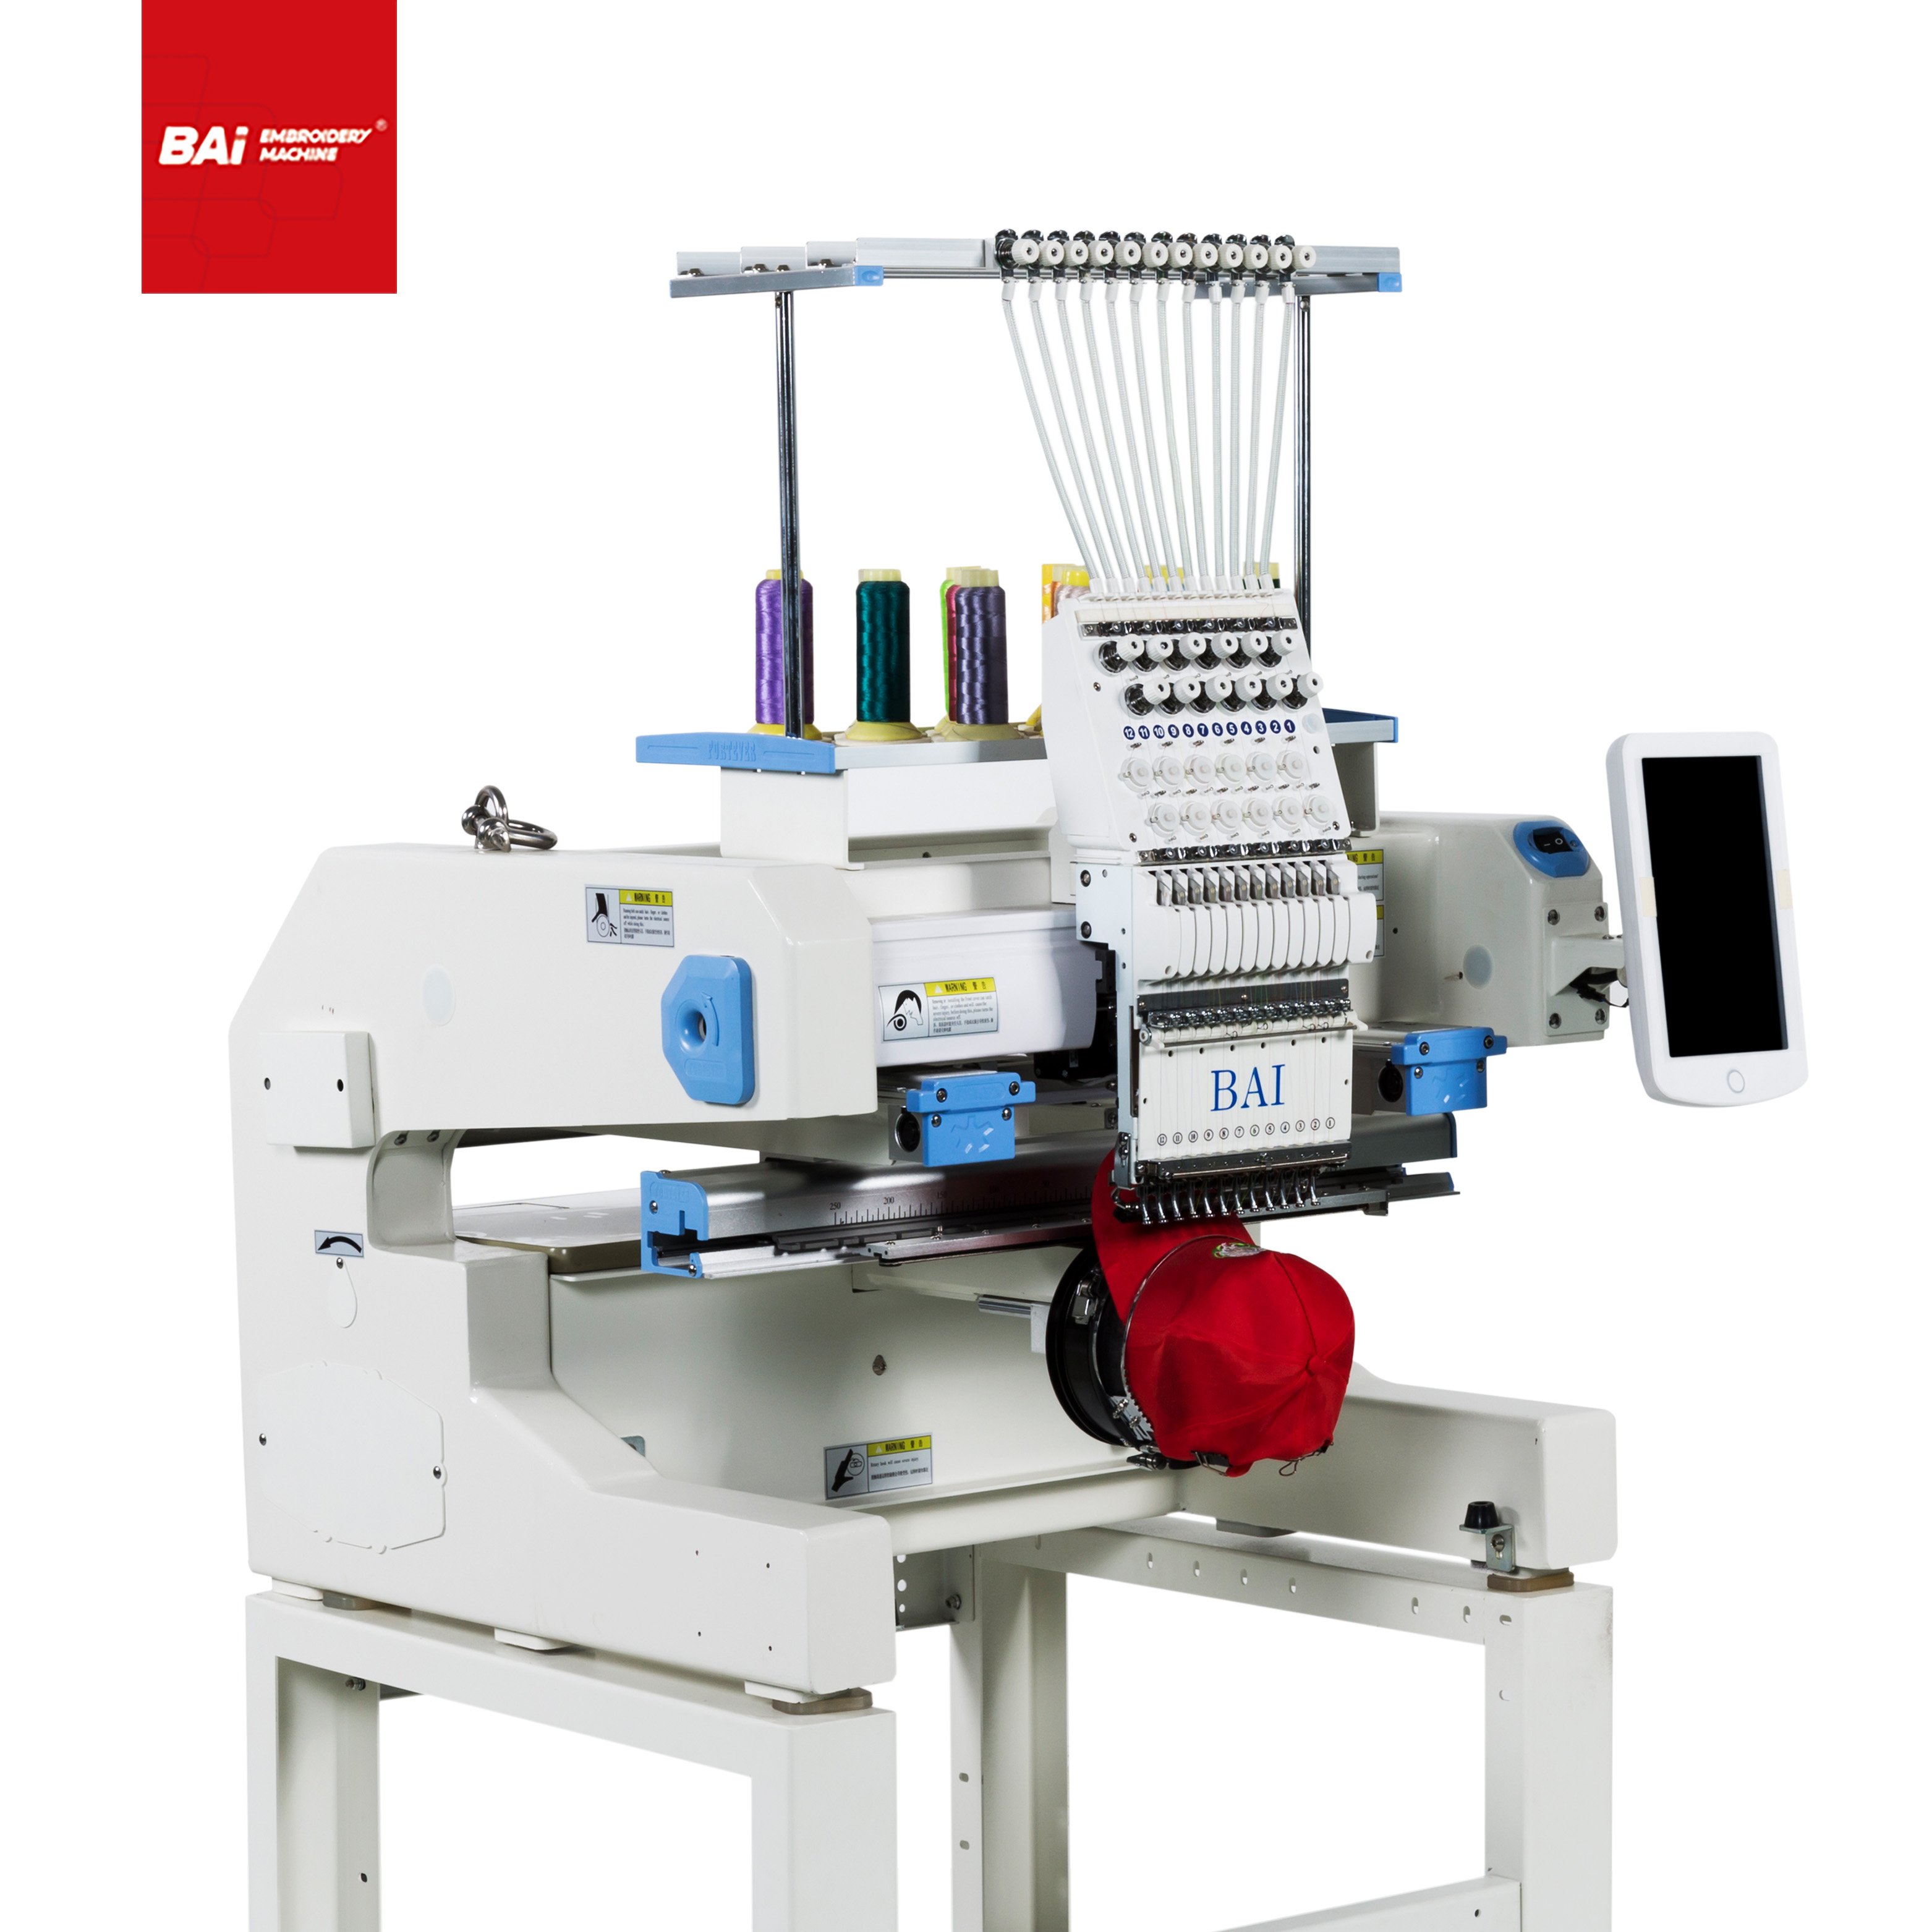 BAI Latest Embroidery Machine for Professional for High Speed